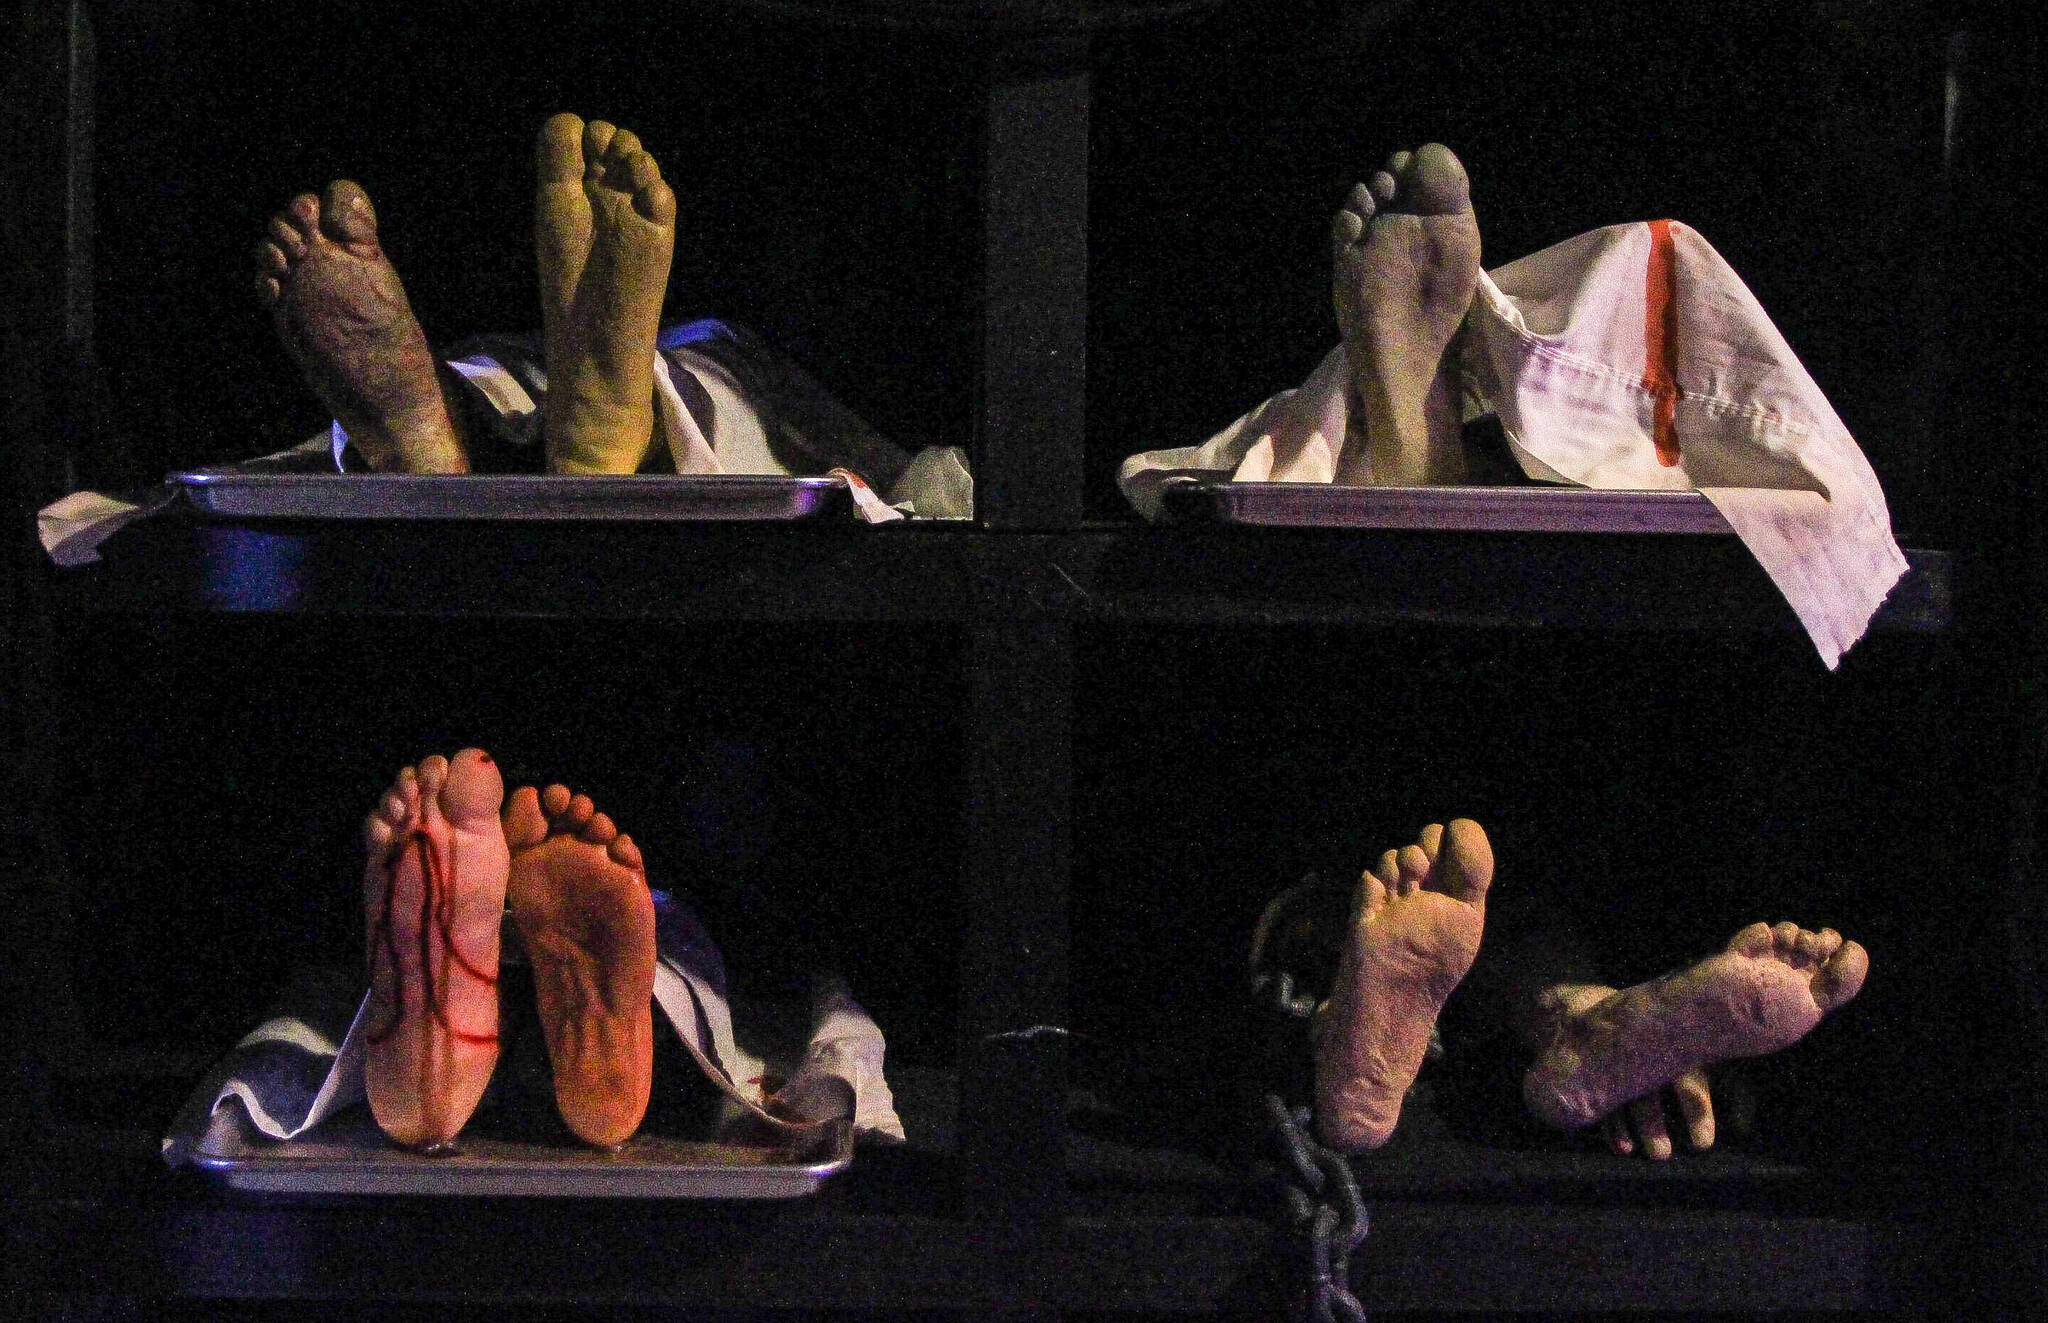 Photo by Luisa Loi
Decaying bodies lay on a body mortuary storage rack.